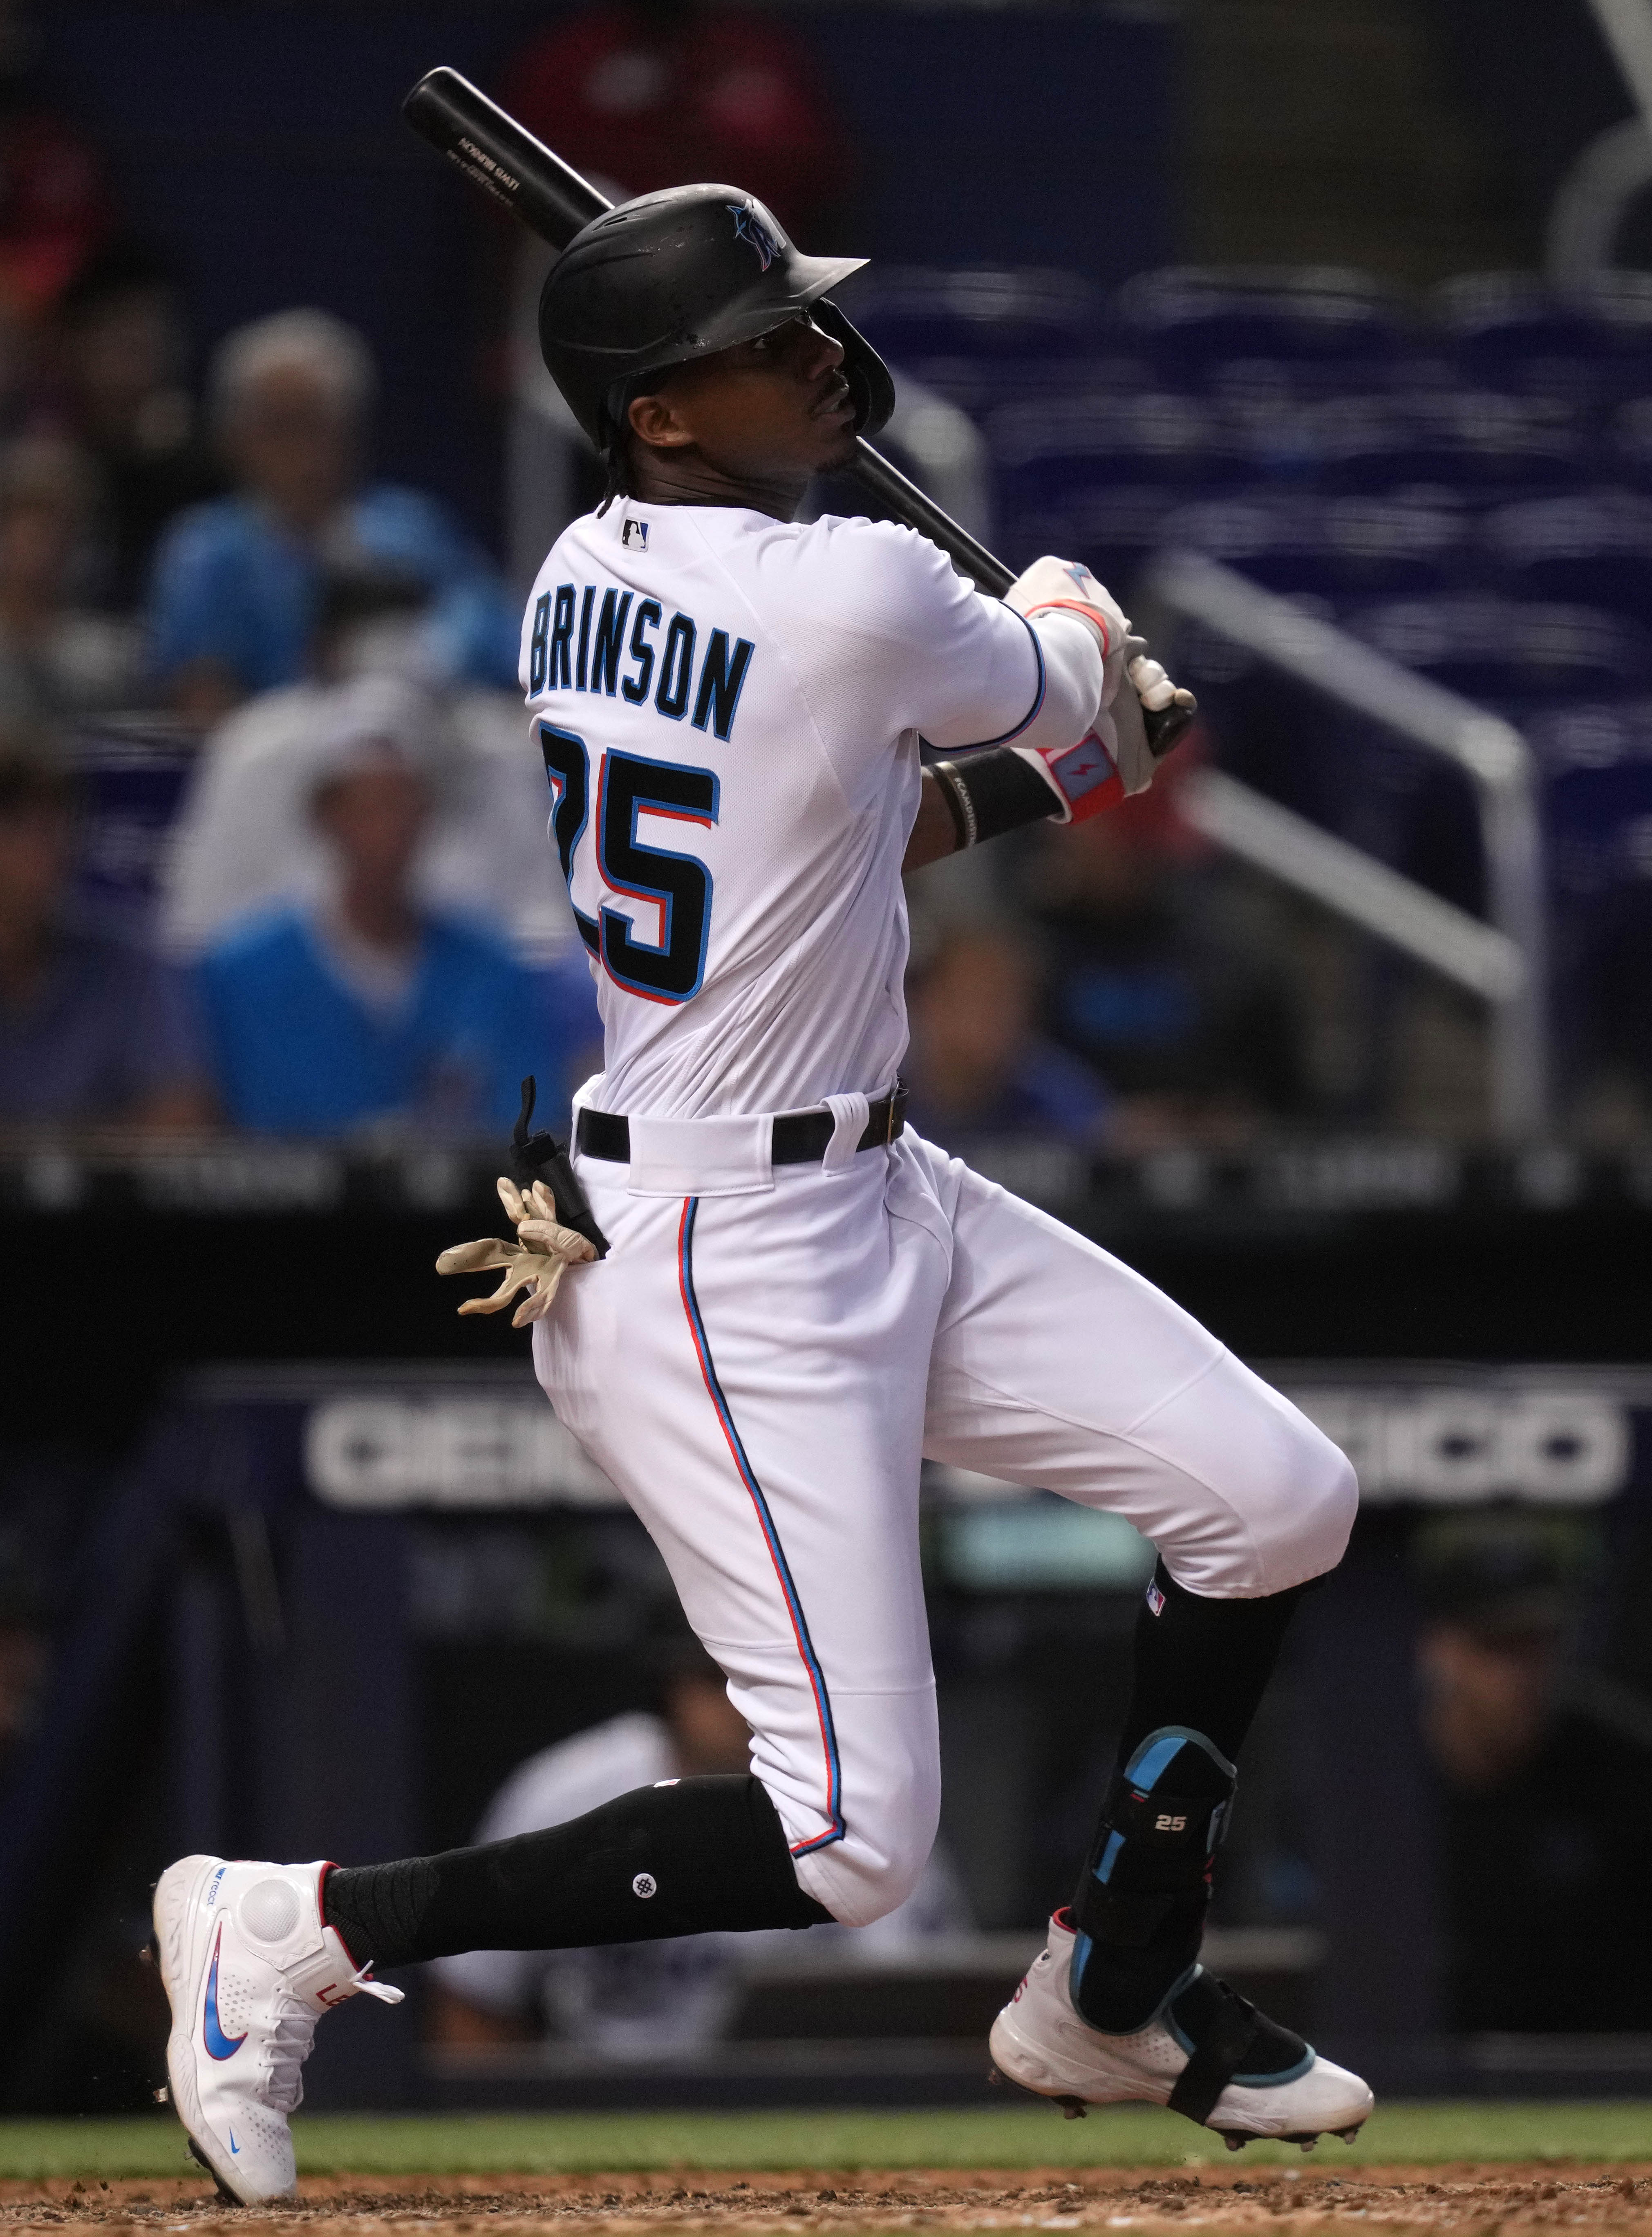 Miami Marlins left fielder Lewis Brinson (25) at bat in the game against the New York Mets at loanDepot park